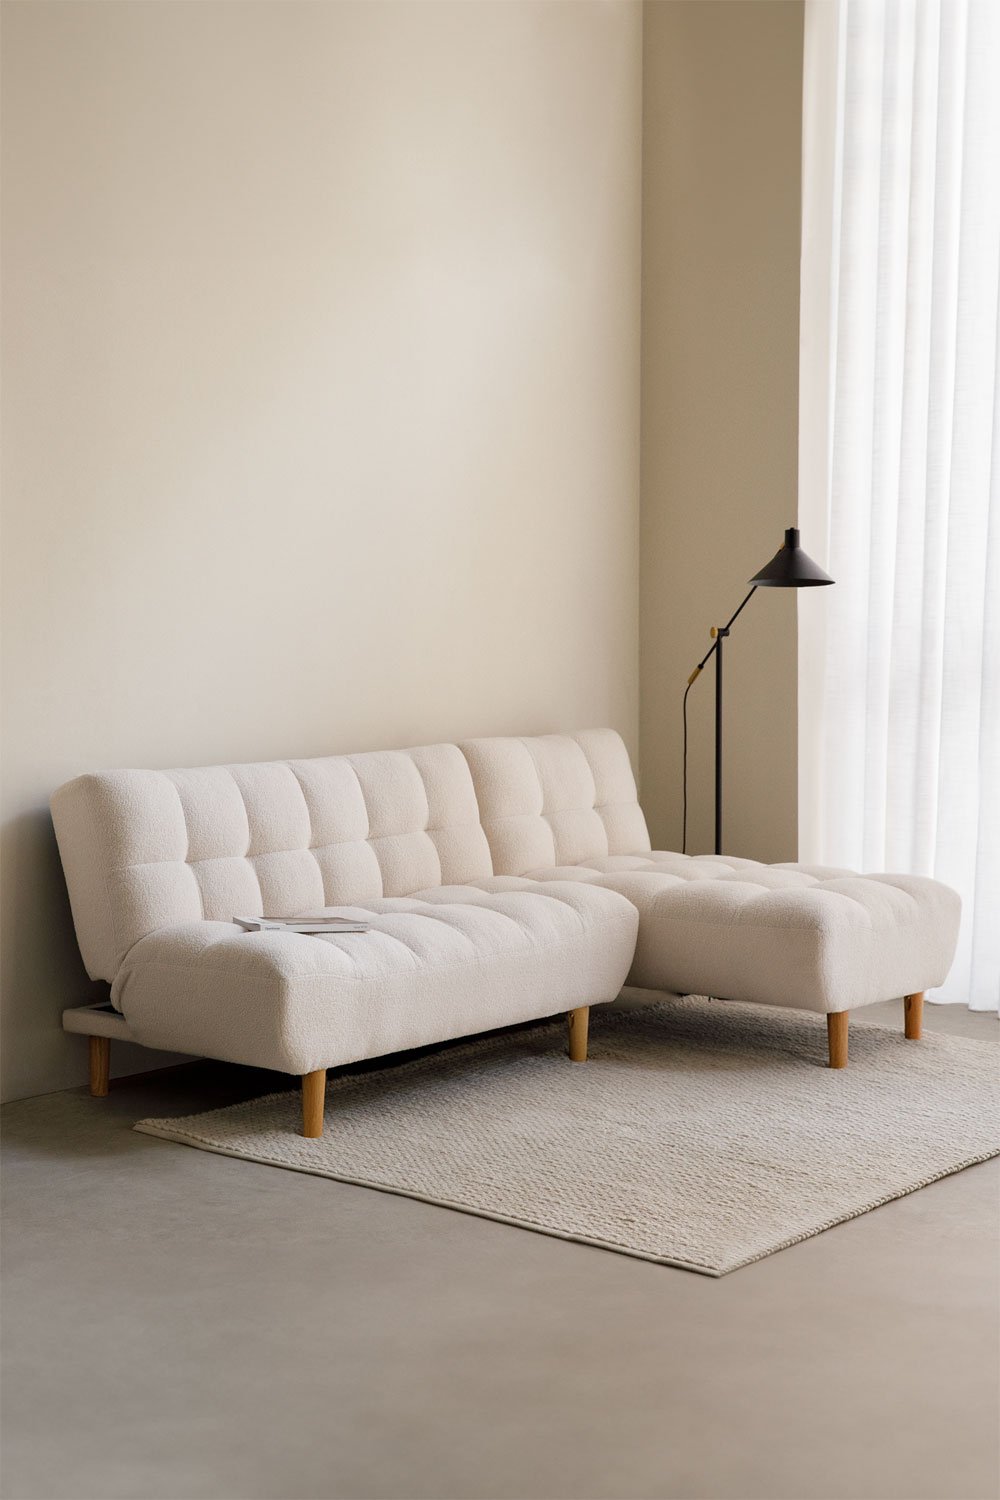 3 Seater Chaise Longue Sofa Bed in Borreguito Madison, gallery image 1